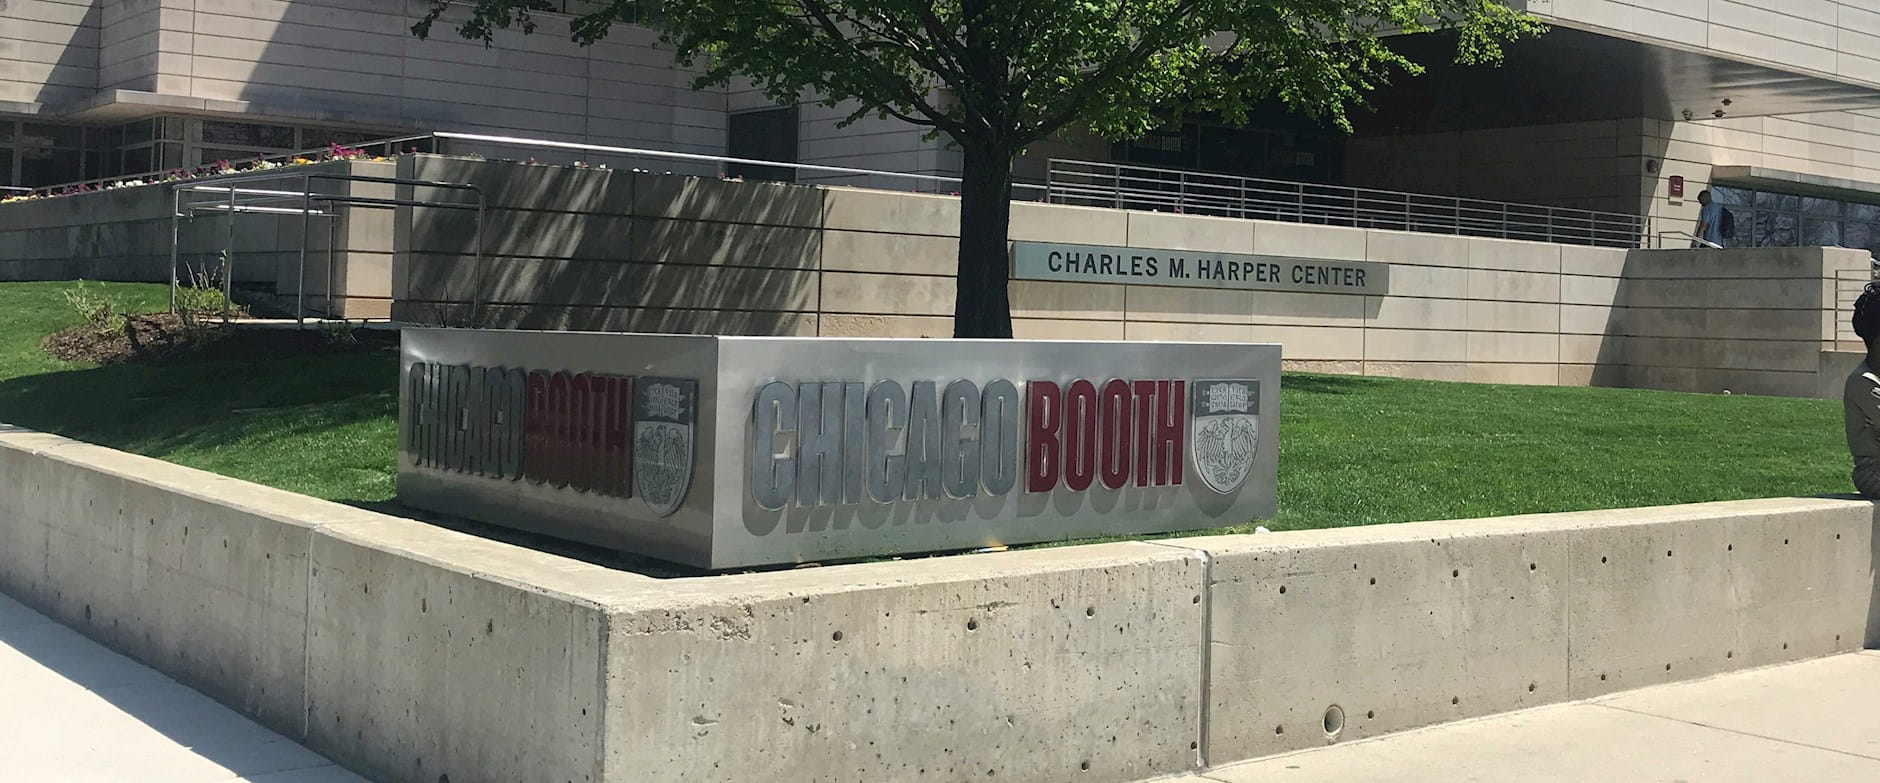 ChicagoBooth (@chicagobooth) • Instagram photos and videos